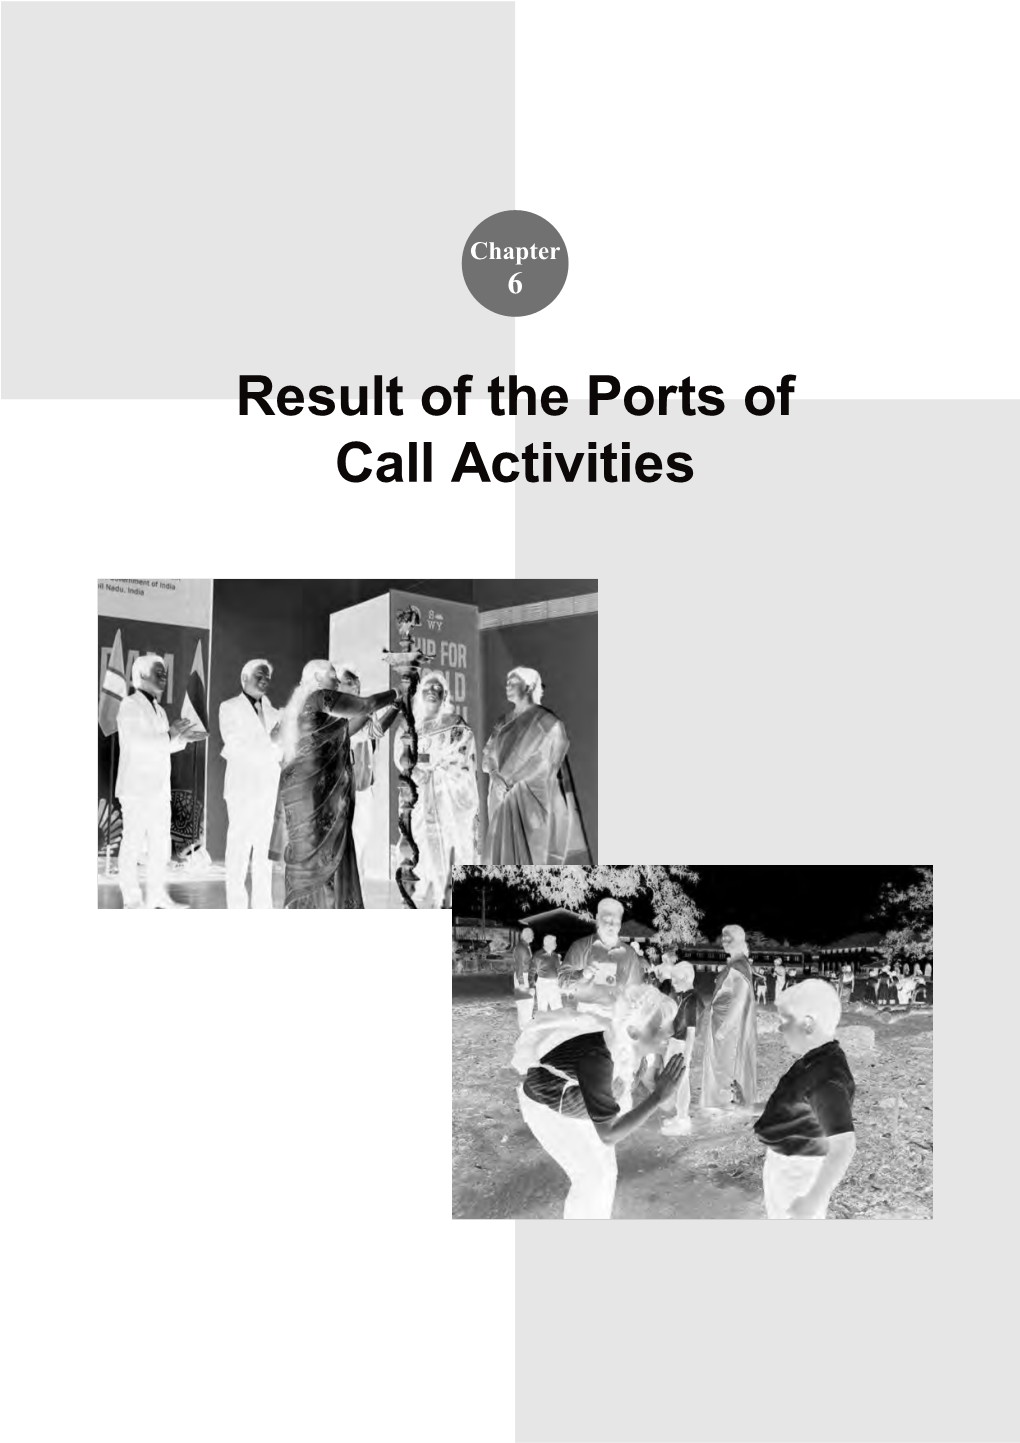 Chapter 6 Result of the Ports of Call Activities